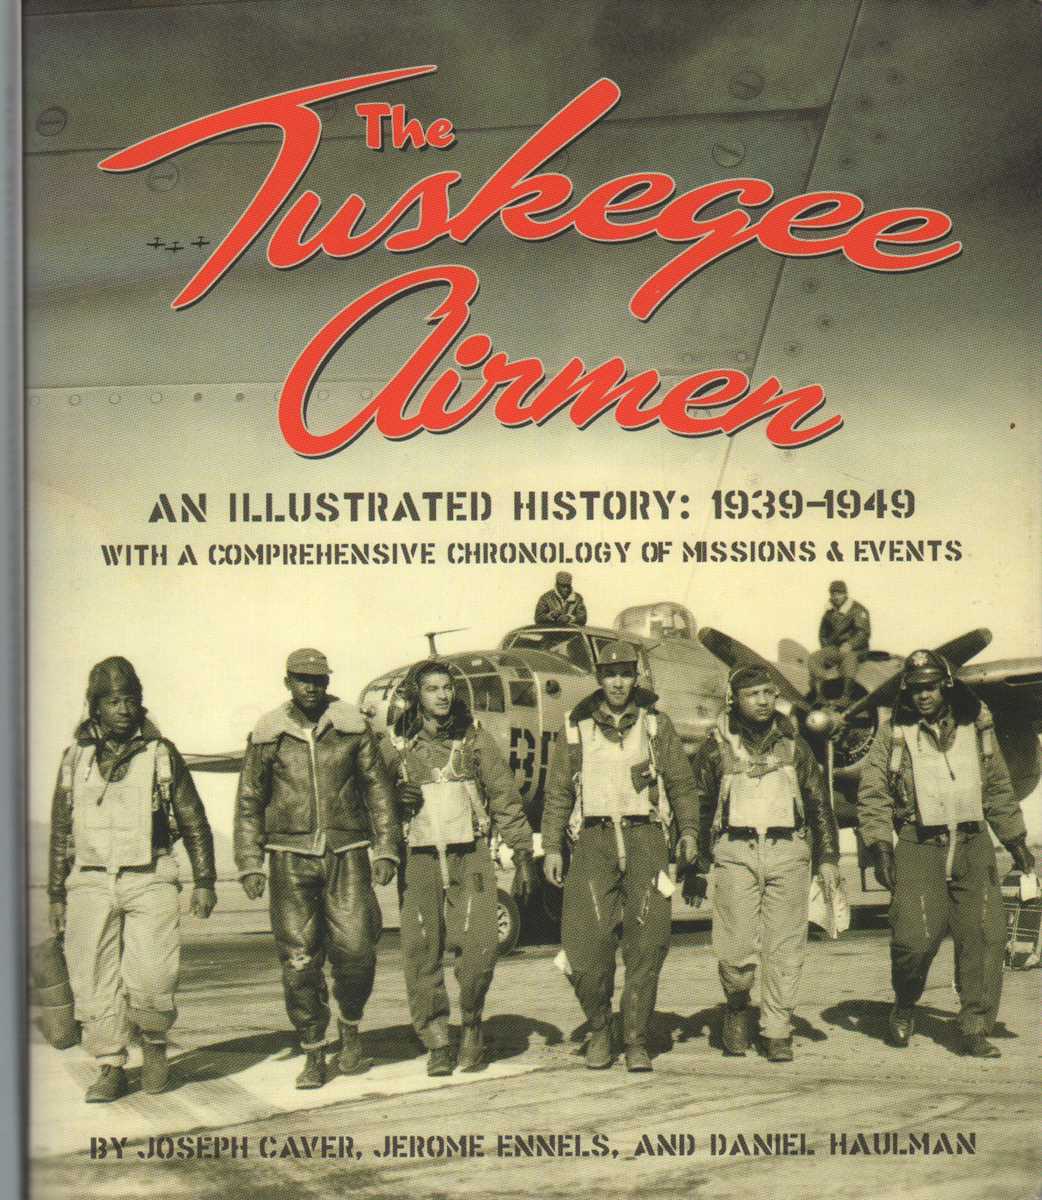 Caver, Joseph D. & Jerome Ennels & Daniel Haulman - THE TUSKEGEE AIRMEN An Illustrated History: 1939-1949 with a Comprehensive Chronology of Missions and Events